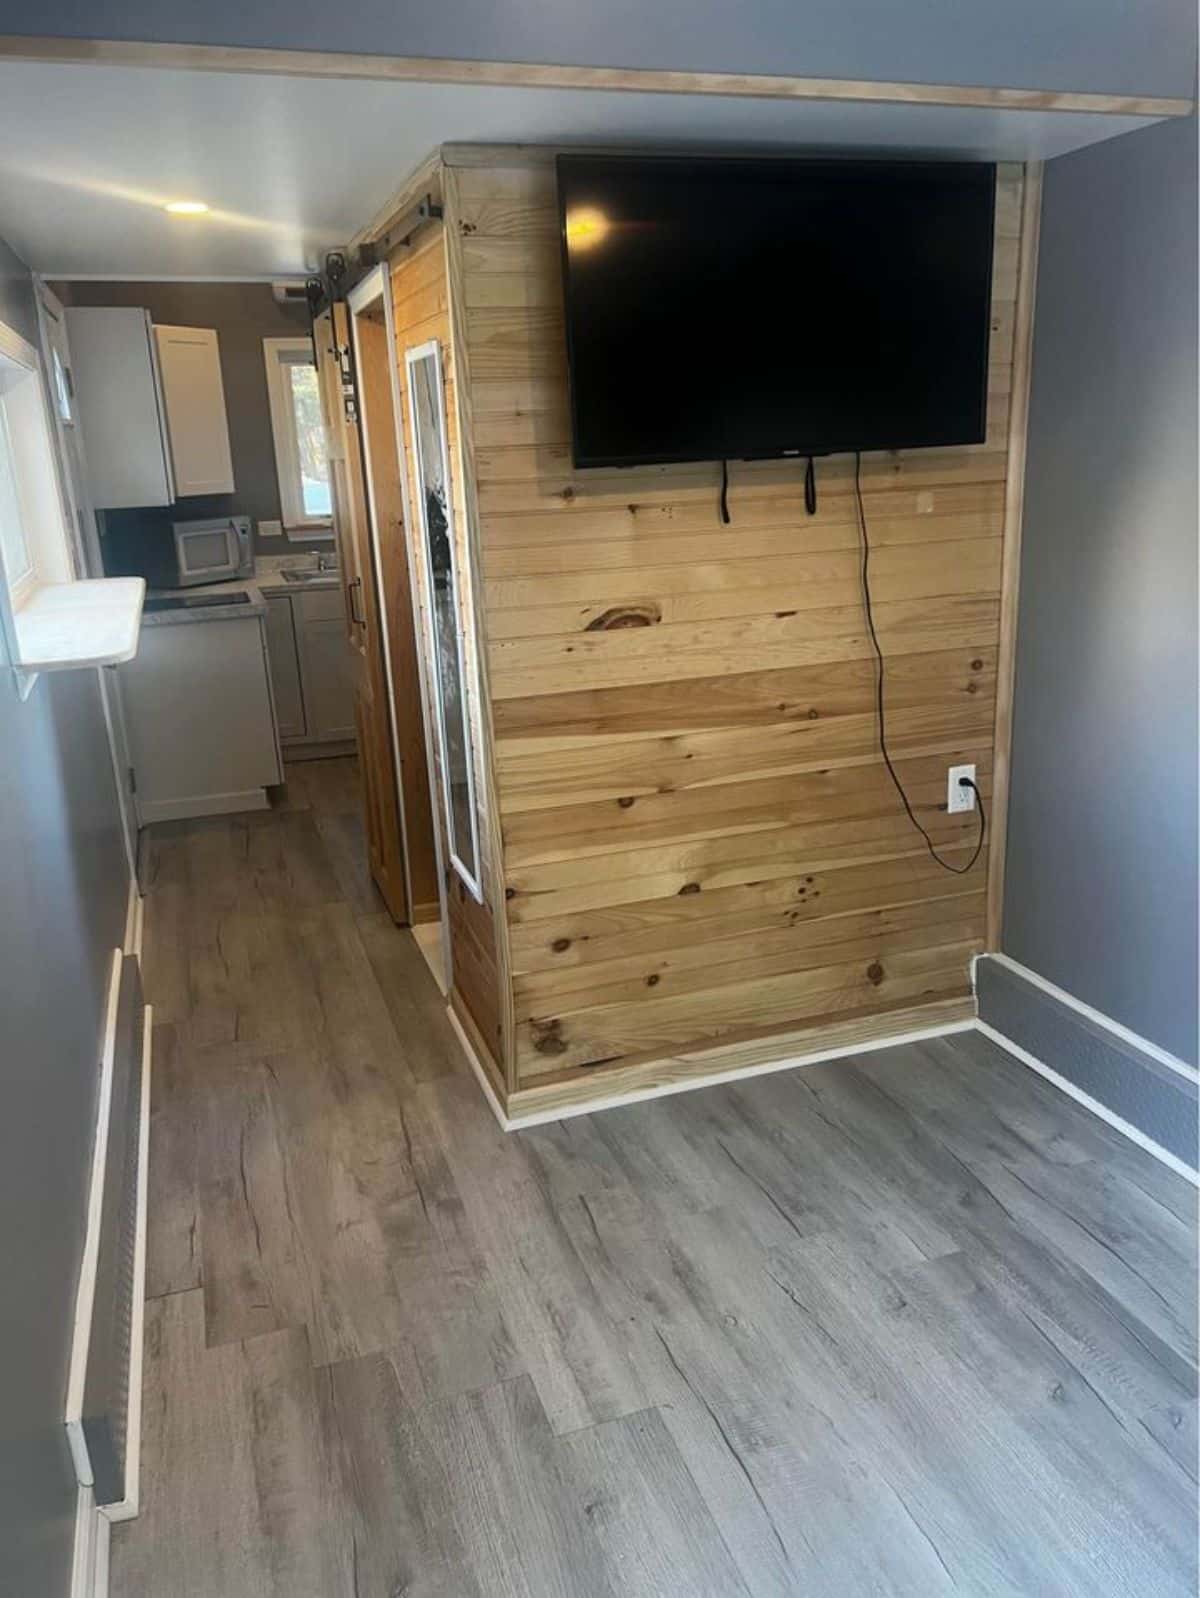 wall mounted TV set in living area of custom tiny house